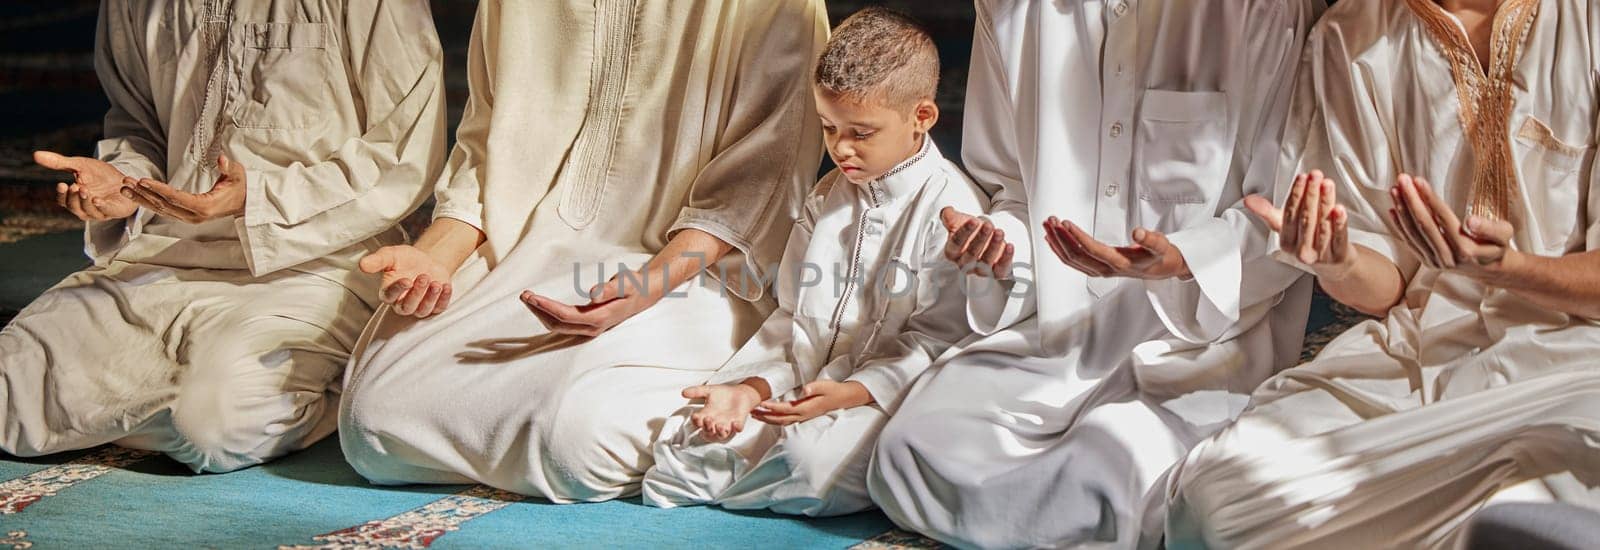 Muslim pray, child or men learning to worship Allah in holy temple or mosque with gratitude as a family. Islamic, education or people in praying with boy or kid for Gods teaching, spiritual peace by YuriArcurs